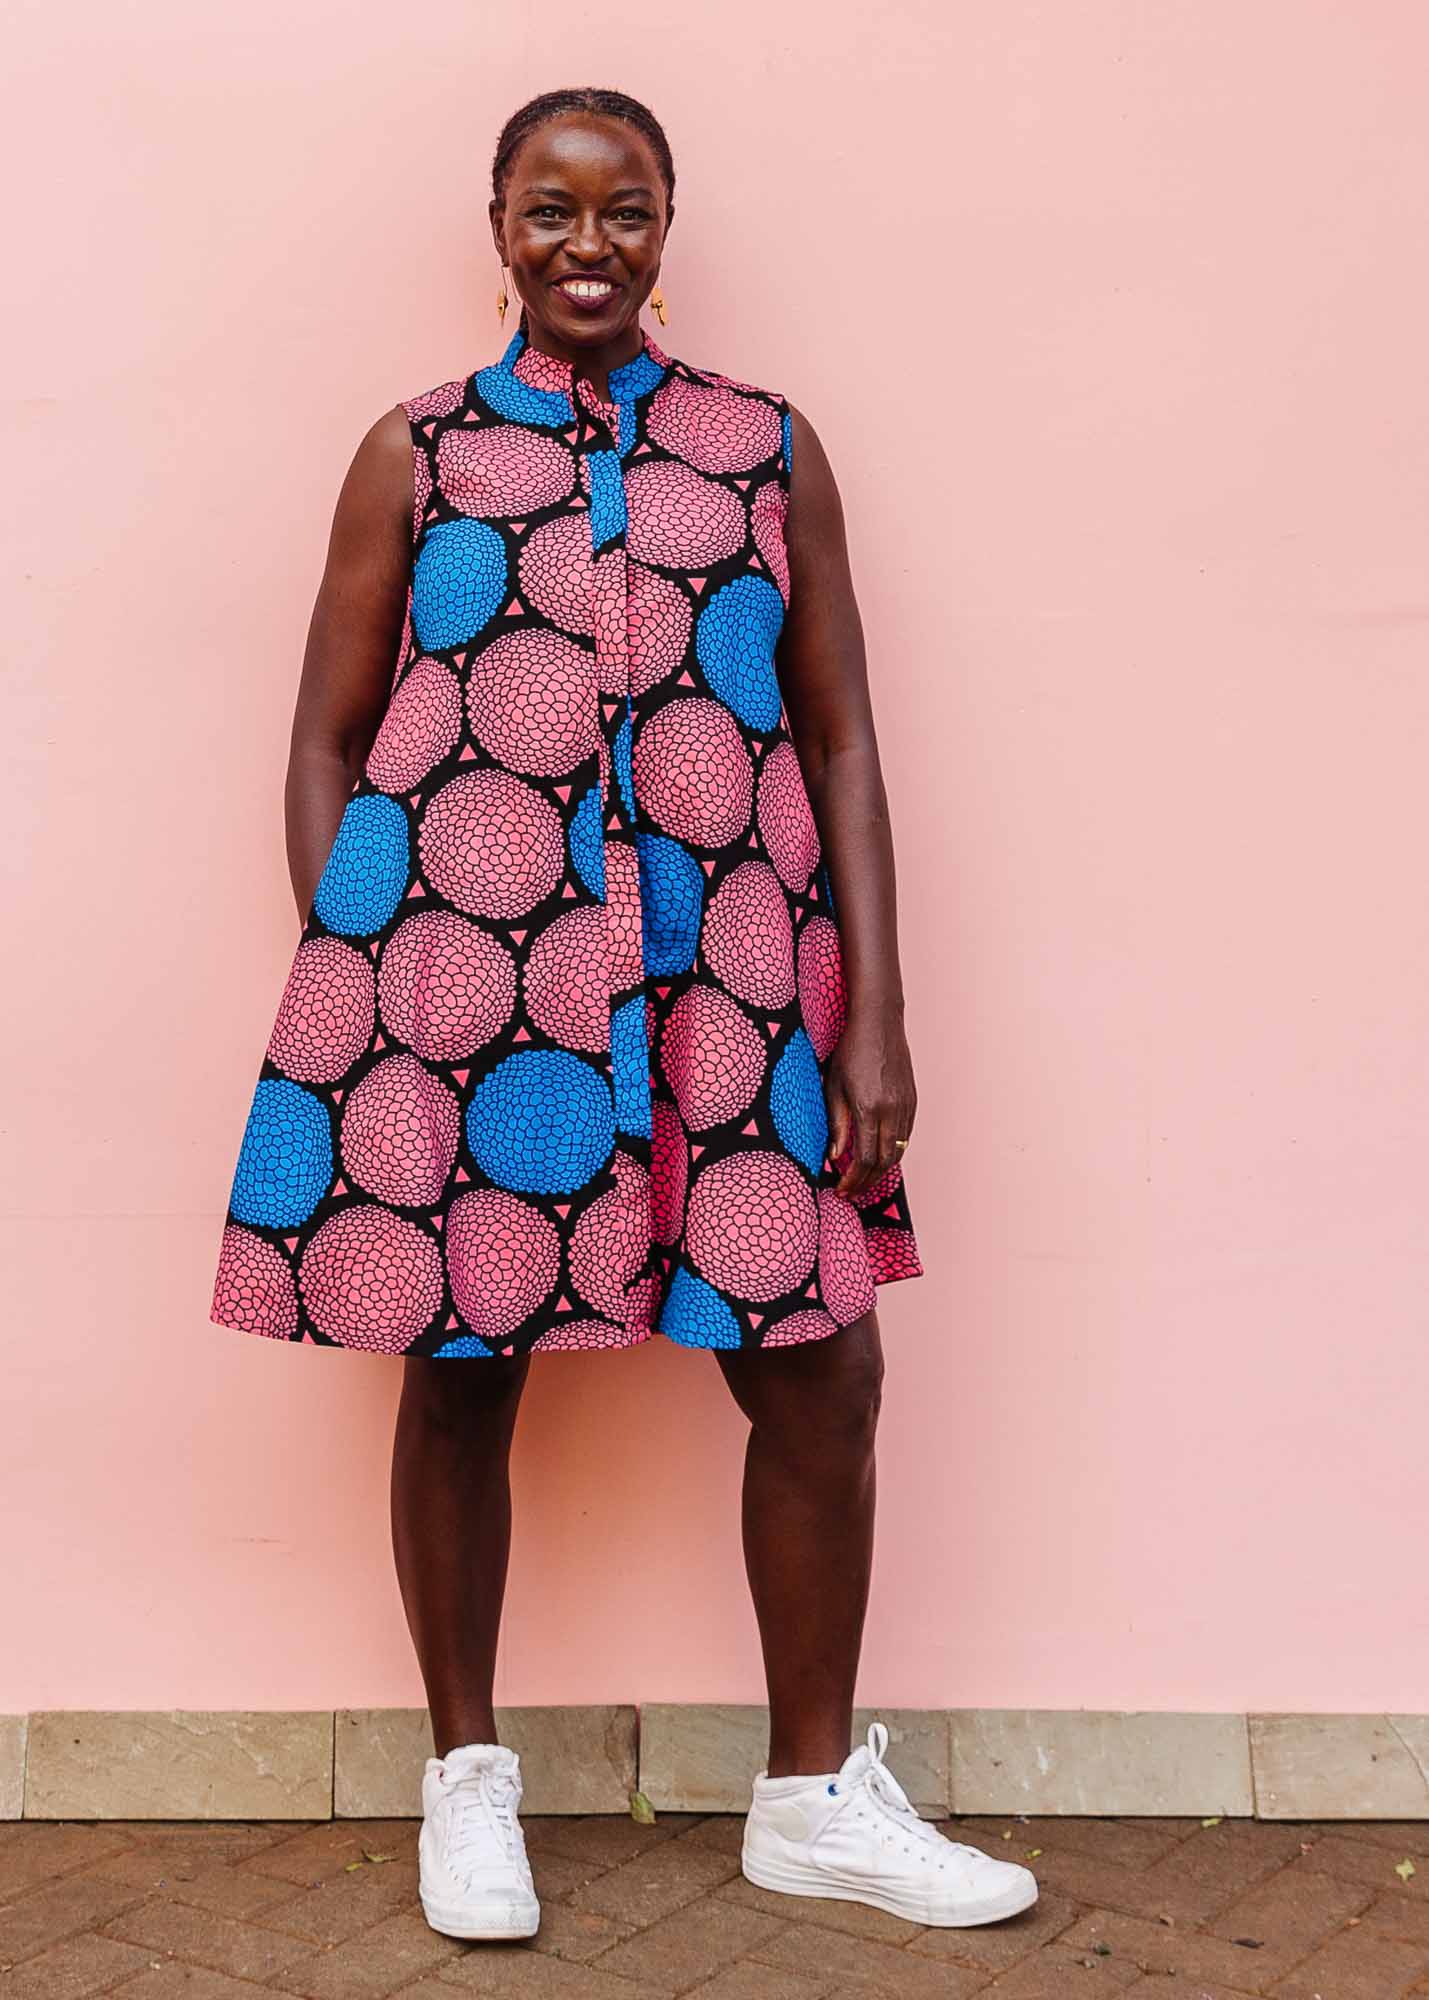 The model is wearing coral, blue and black circular print dress